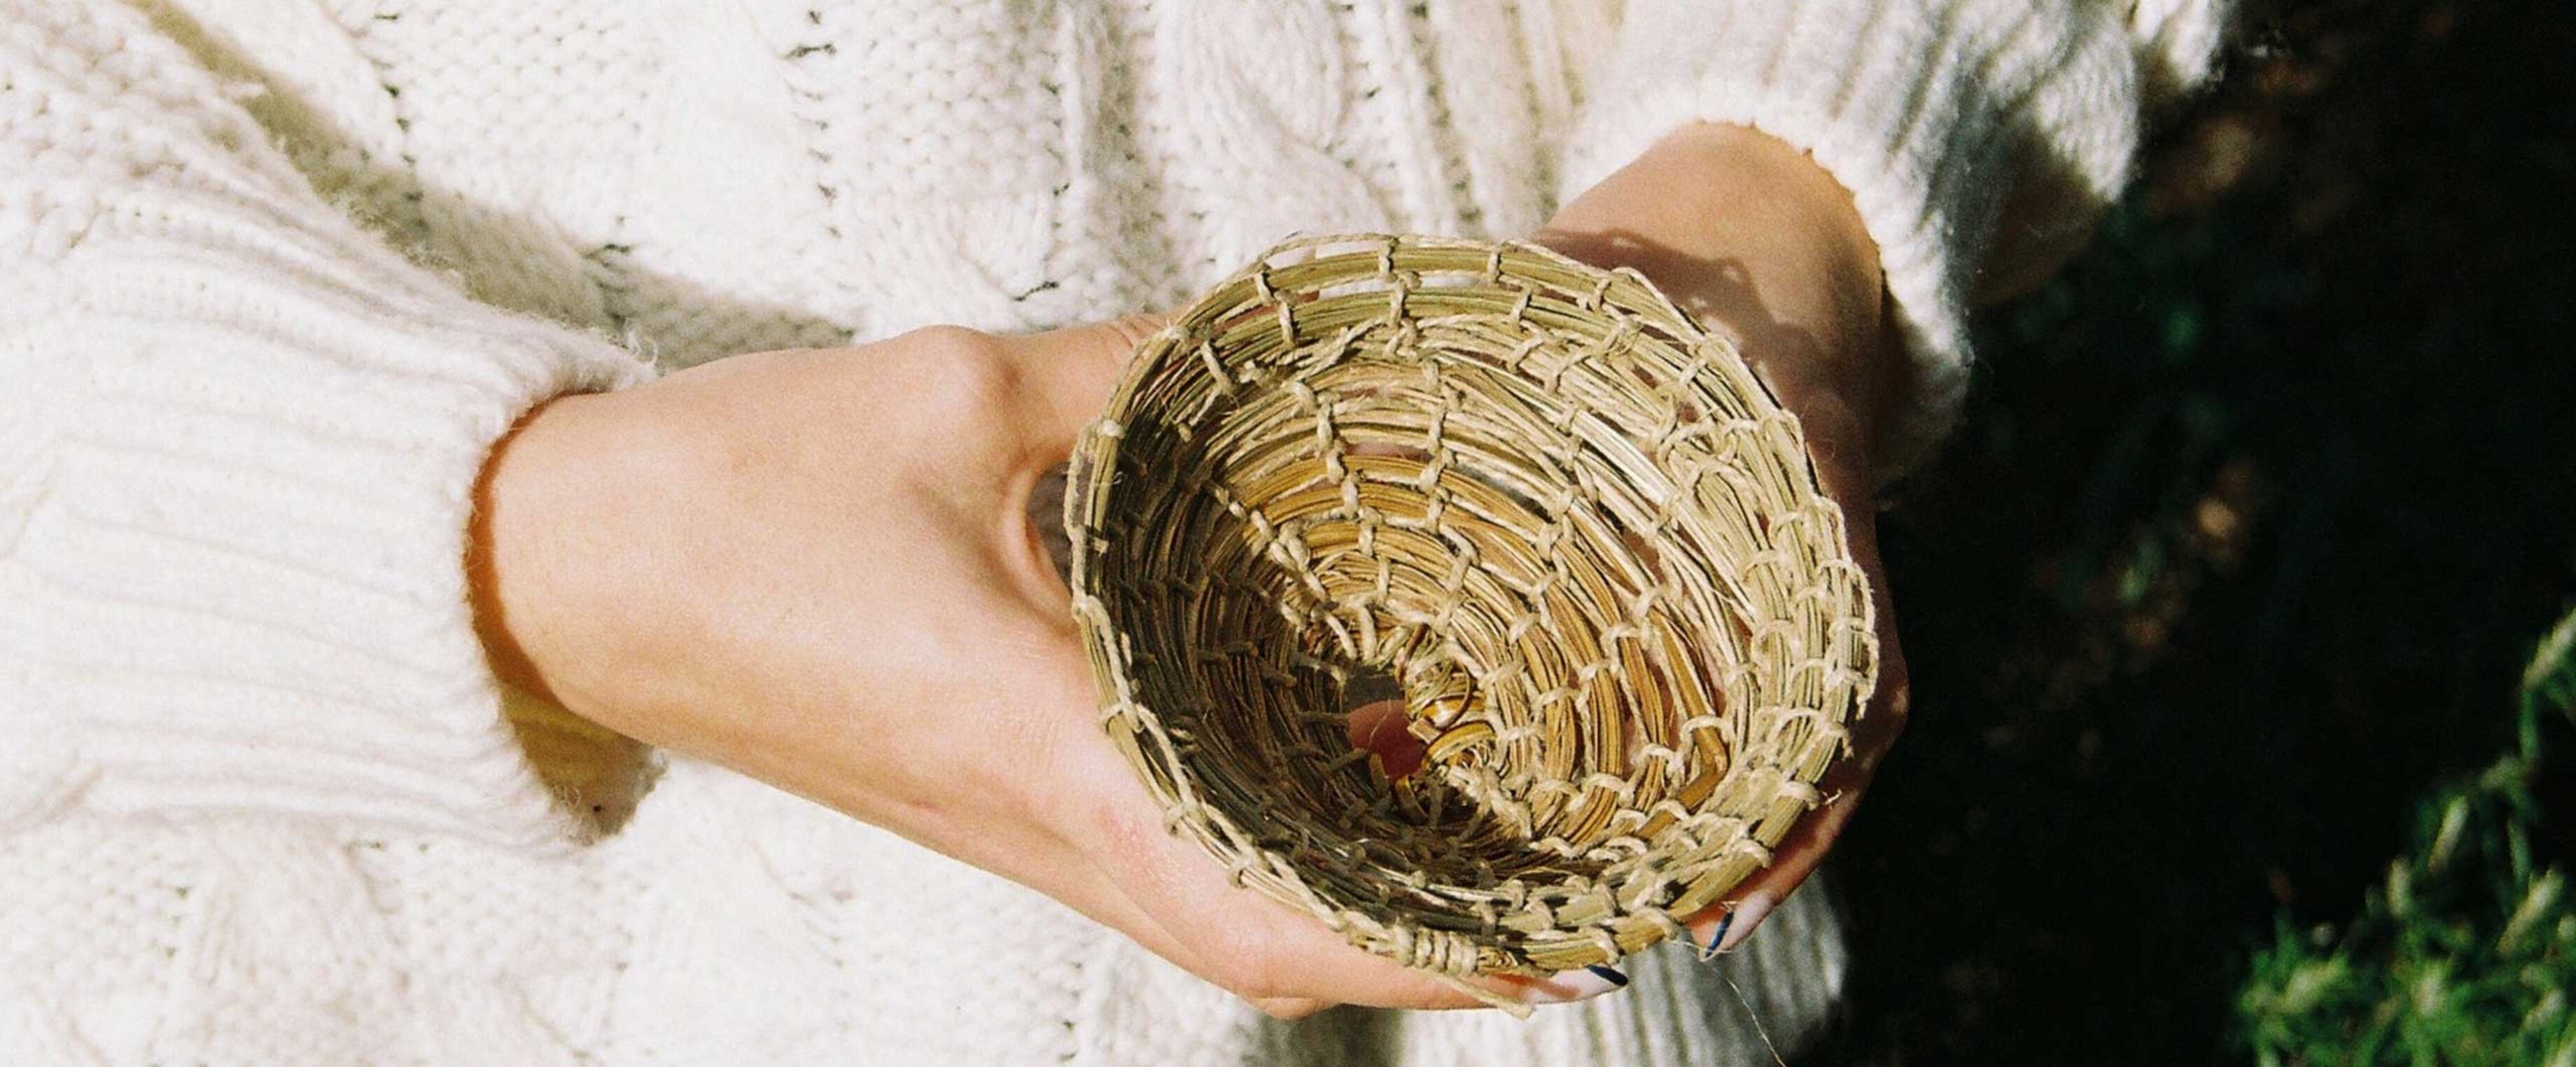 Coil Basketry